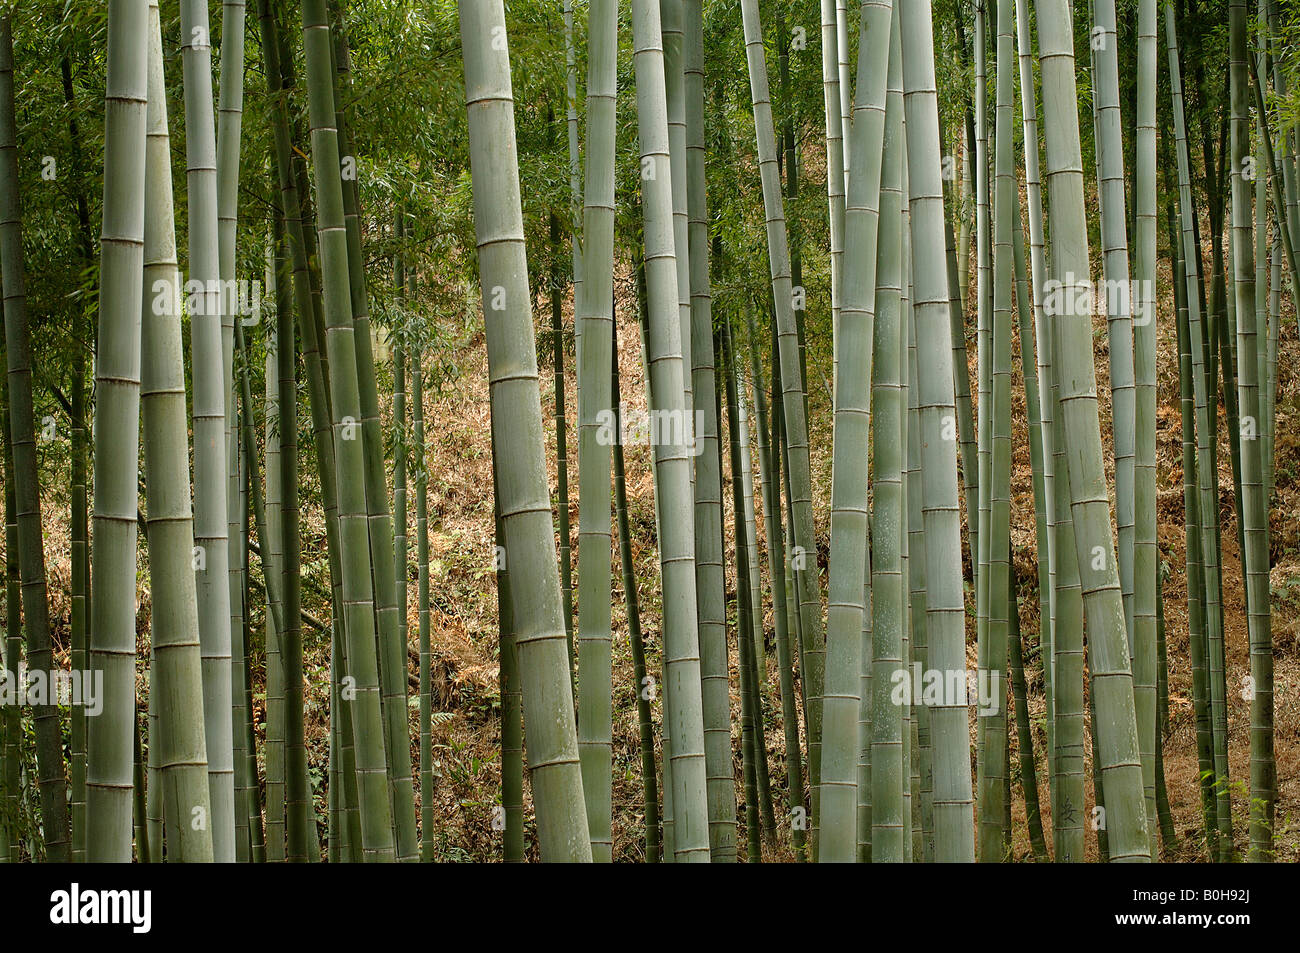 Large moso bamboo Phyllostachys pubescens culms in bamboo forest Anhui where film Crouching Tiger Hidden Dragon filmed Stock Photo